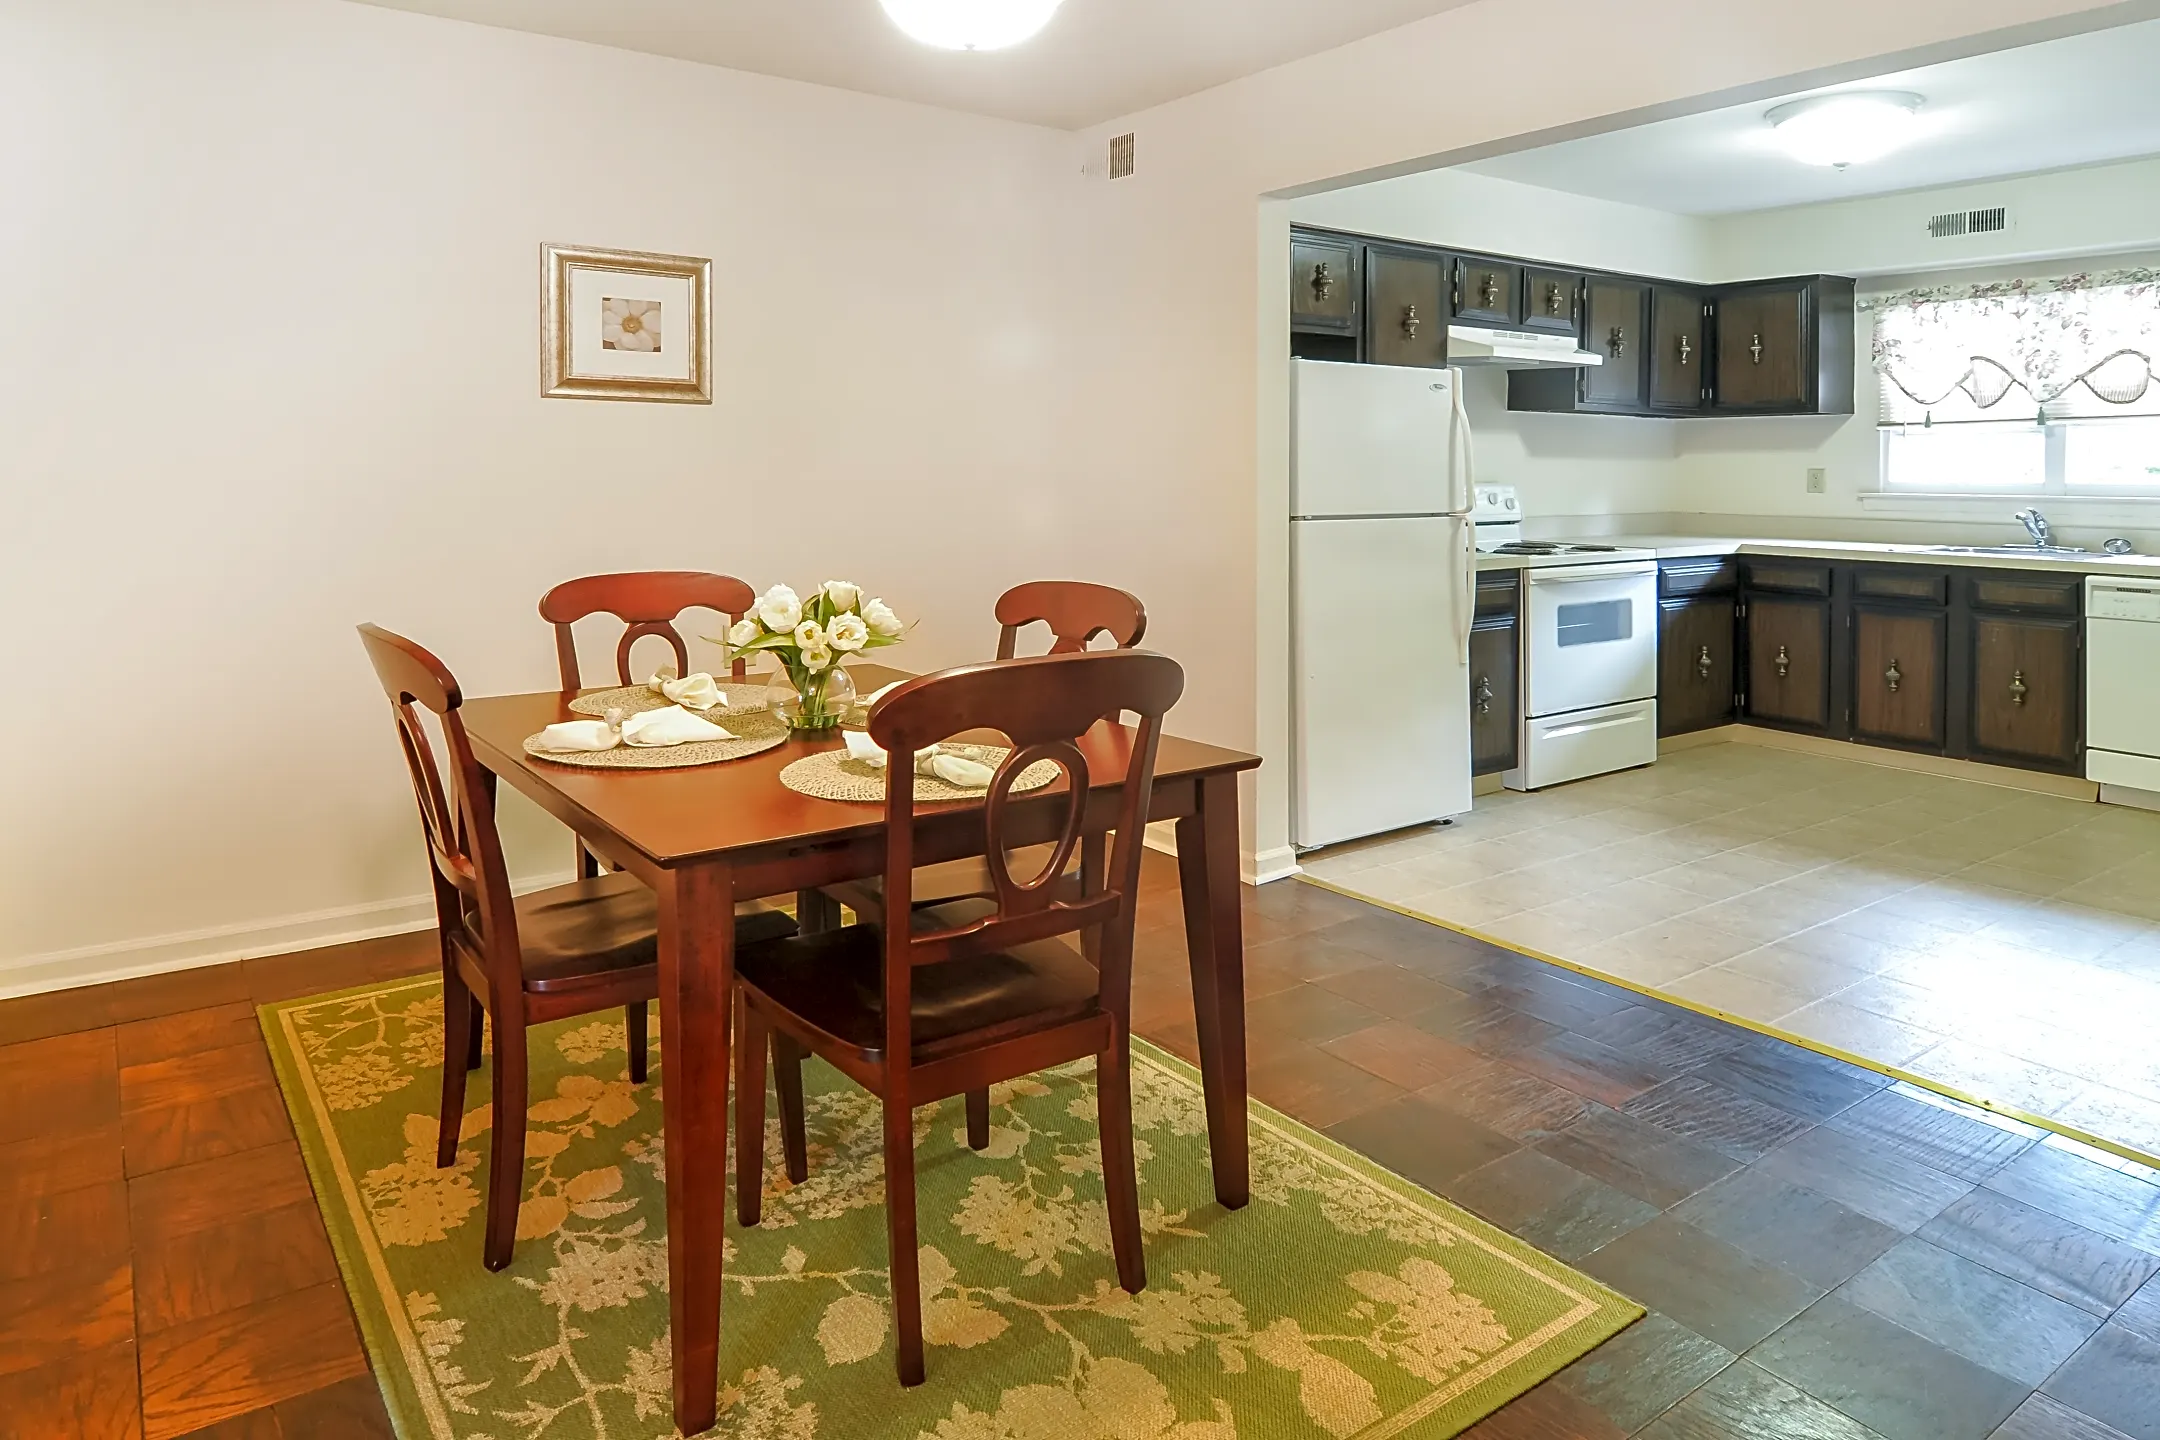 Kitchen - Olde Forge East Townhouses - Morristown, NJ